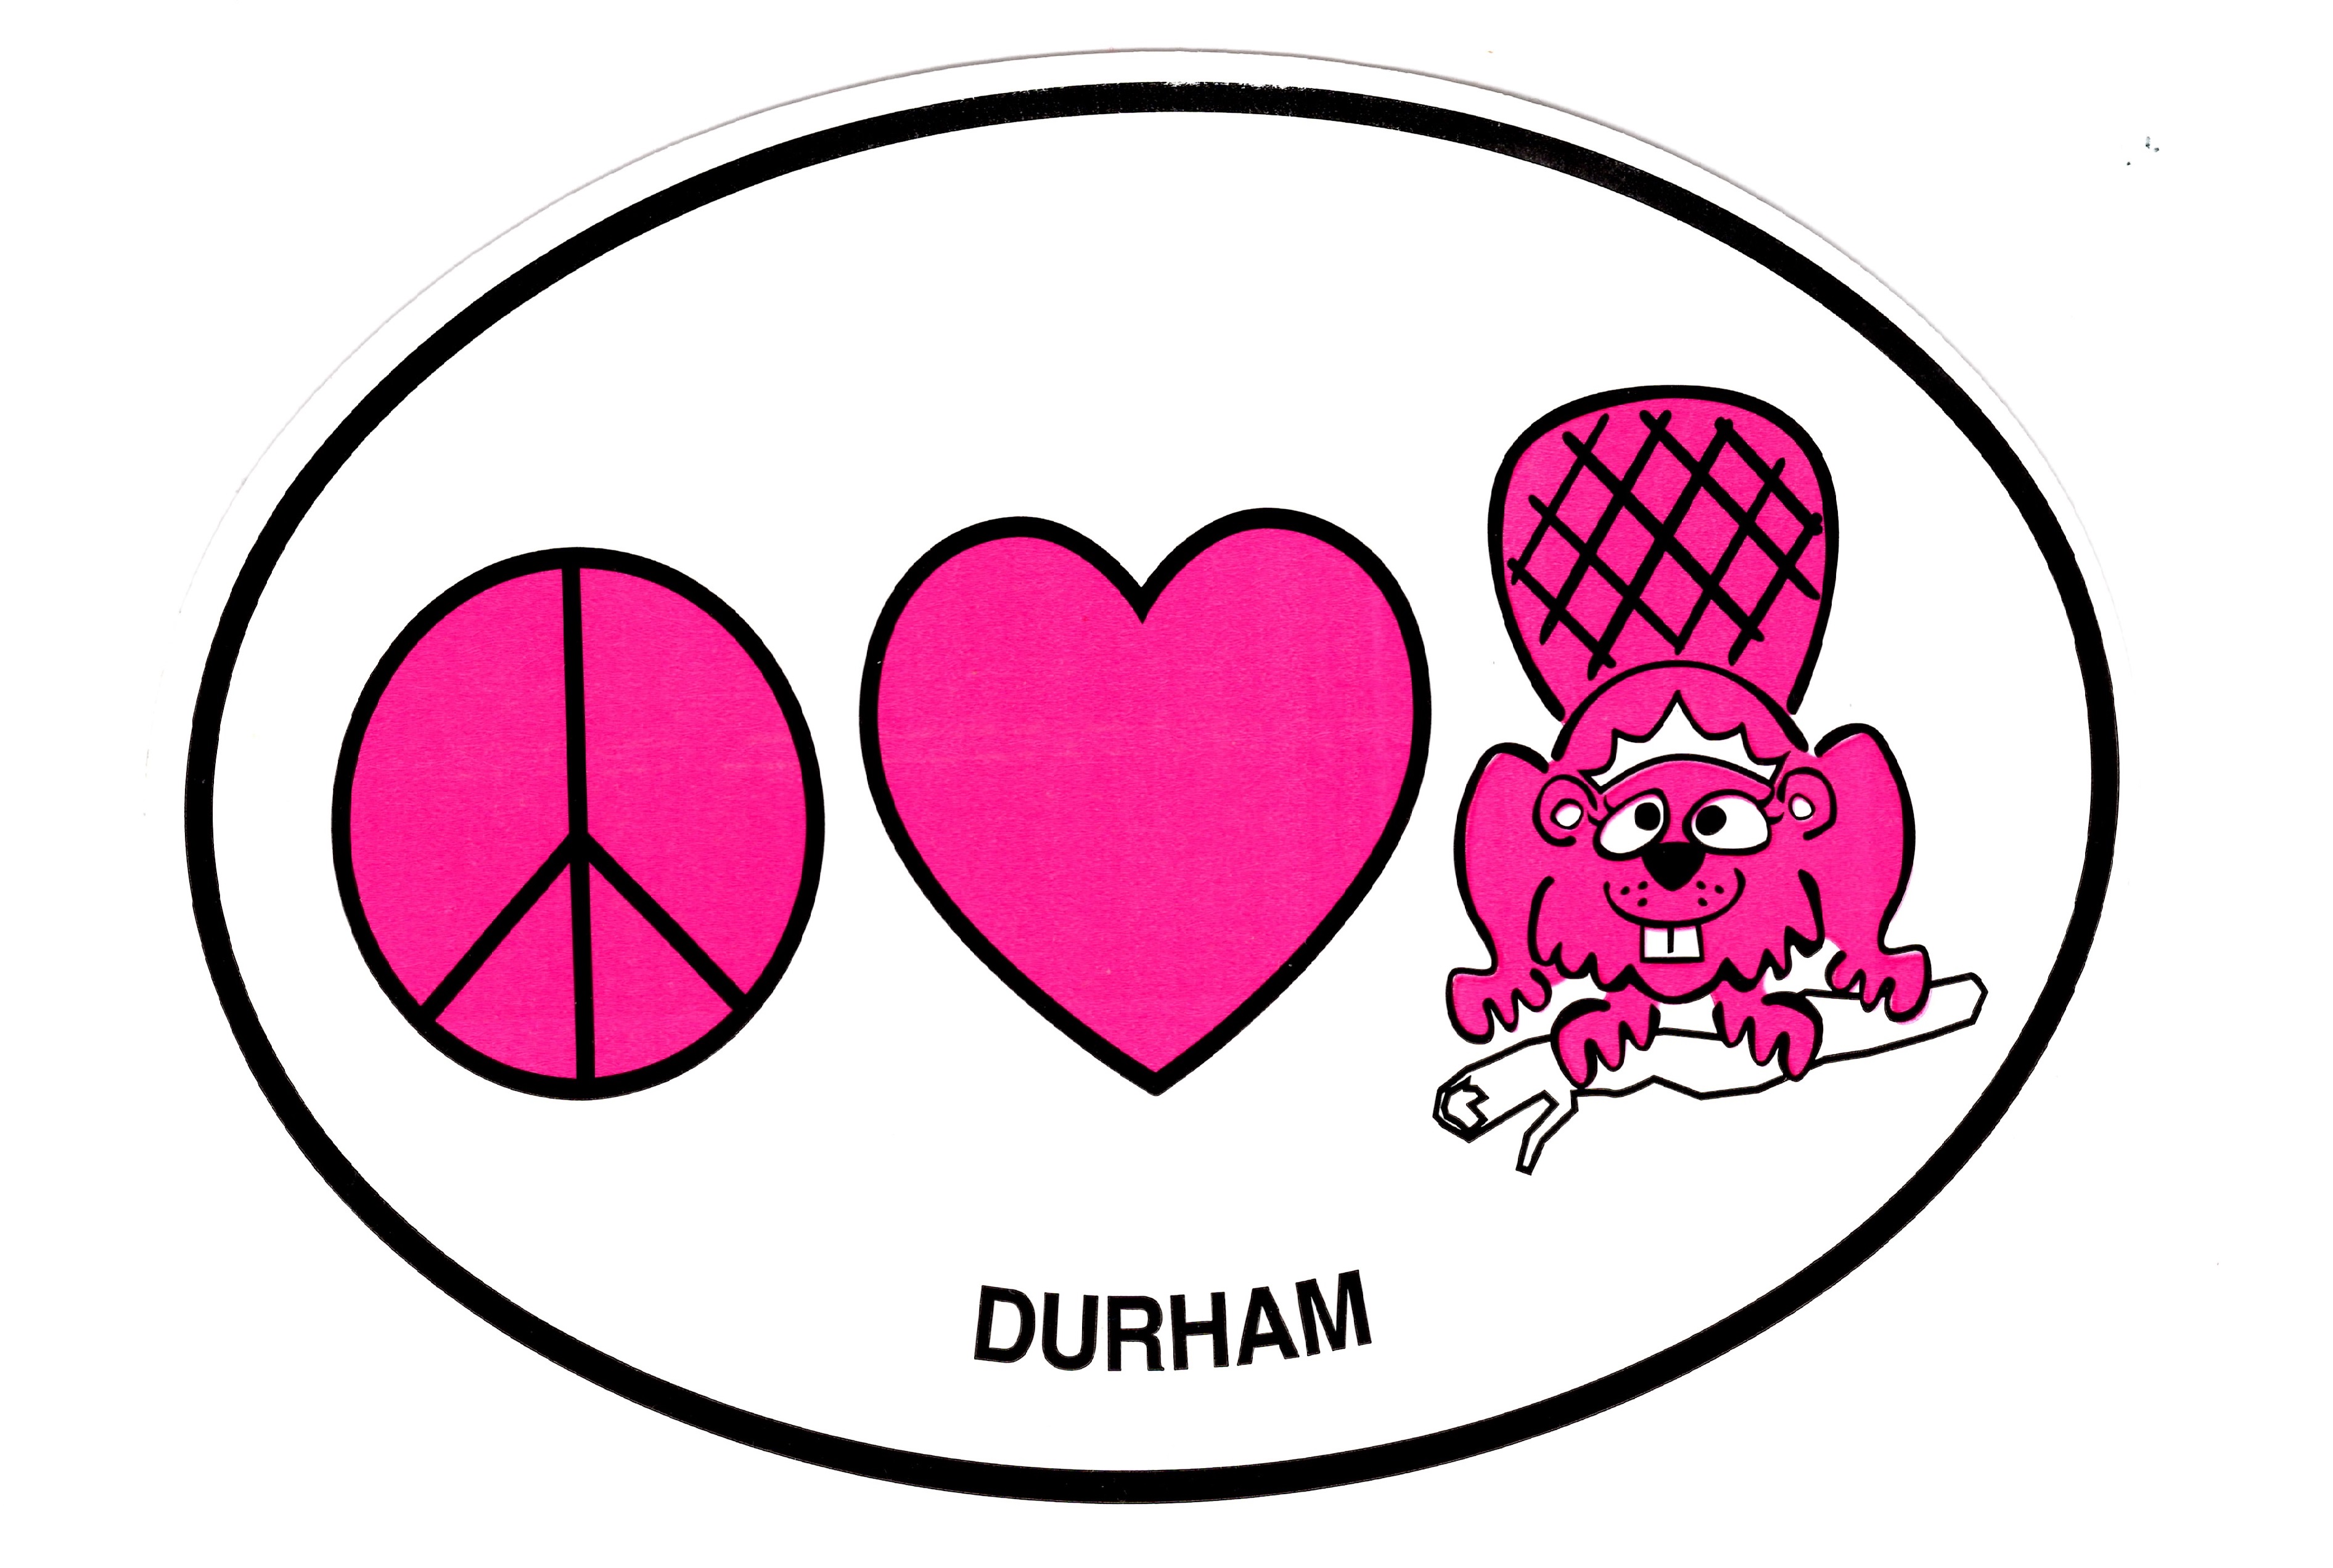 Picture of a sticker that has pink illustrations of a peace sign, a heart, and a beaver